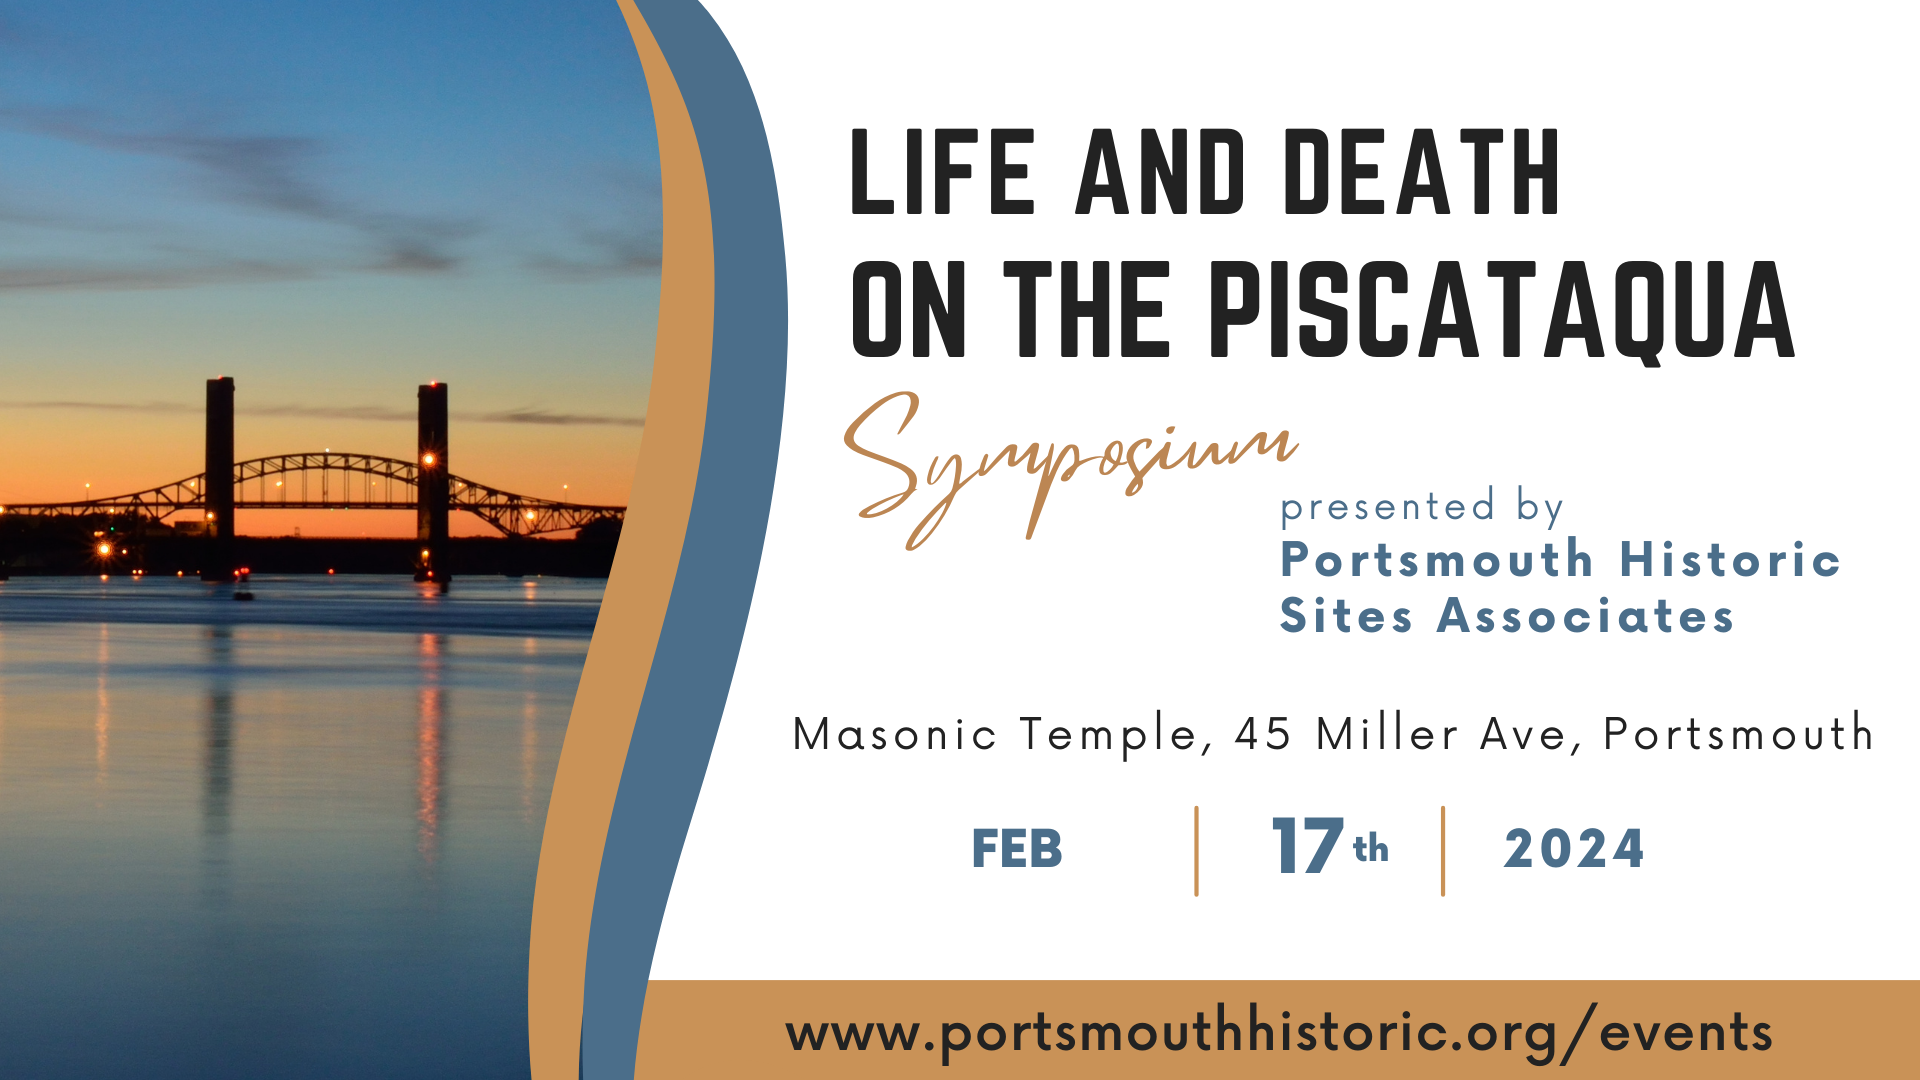 Image of the sun setting over a metal two pillar bridge with water in the foreground. Text reads "Life and Death on the Piscataqua A symposium presented by Portsmouth Historic Sites Associates Saturday, February 17 9:00 am – 3:00 pm"